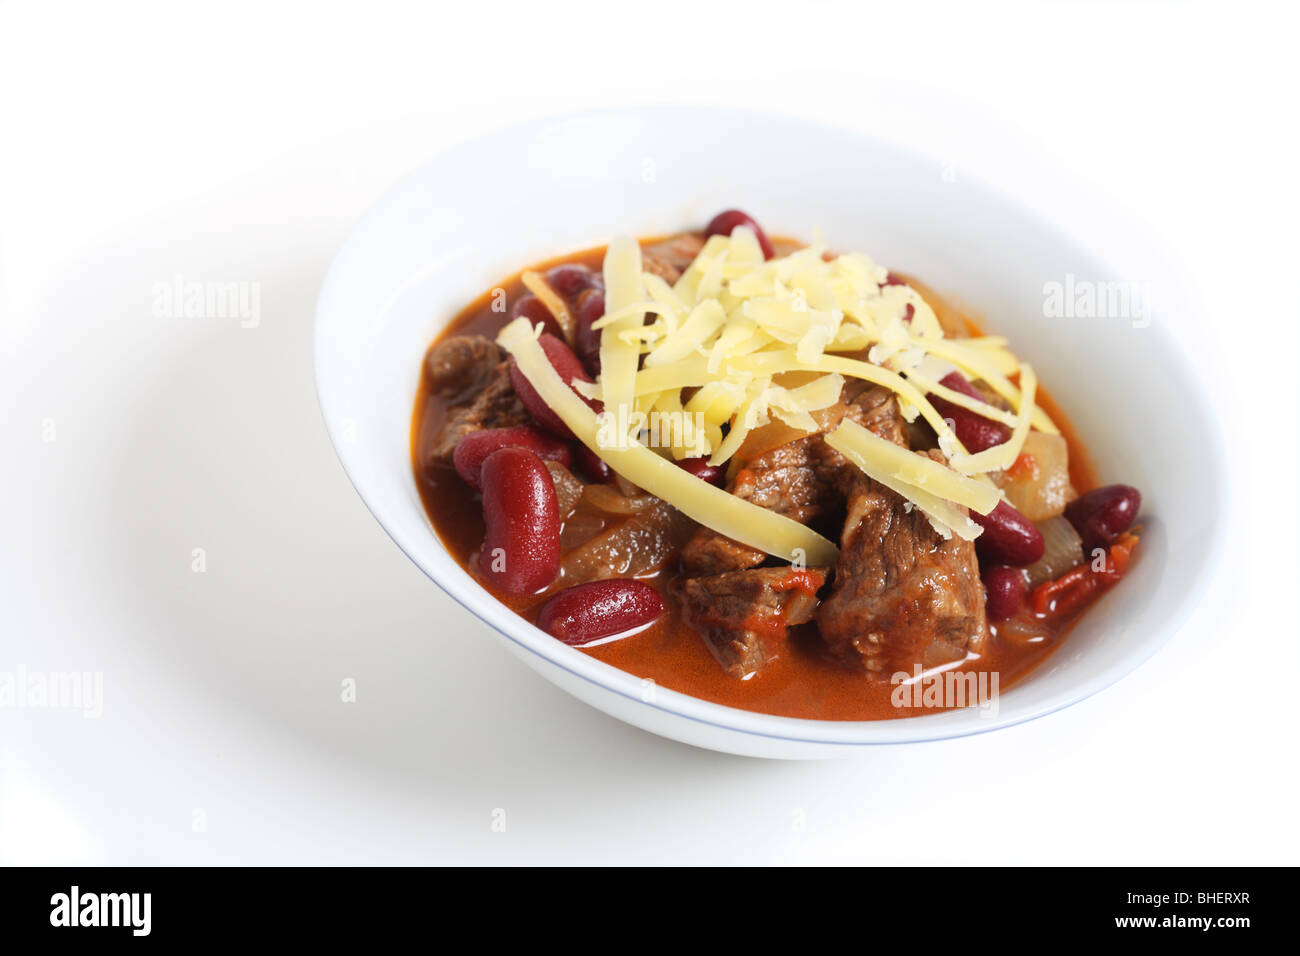 A bowl of beef chili, chilli con carne, topped with cheese, over white with a light shadow Stock Photo